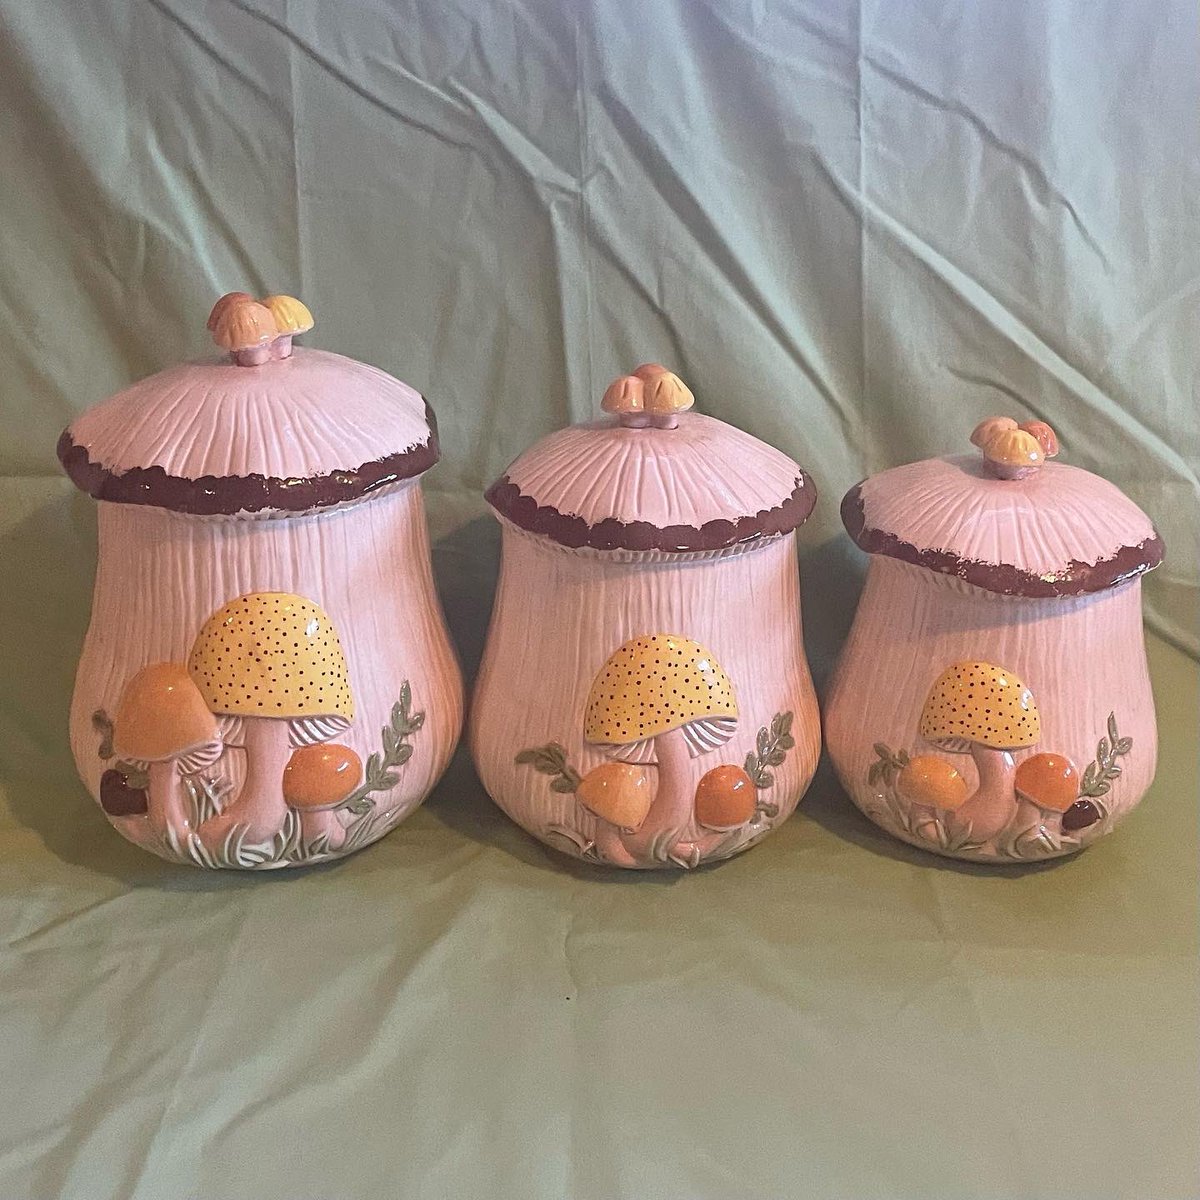 Have a #vintage-themed kitchen or looking for some unique decor? Check out these amazing canister sets…

#pittsburgh #pyrex #vintagepyrex #pyrexcountryfestival #storensee #arnel #arnelsmushroom #vintagemushroom #mushrooms #mushroomdecor #vintagecanisters #vintagekitchen